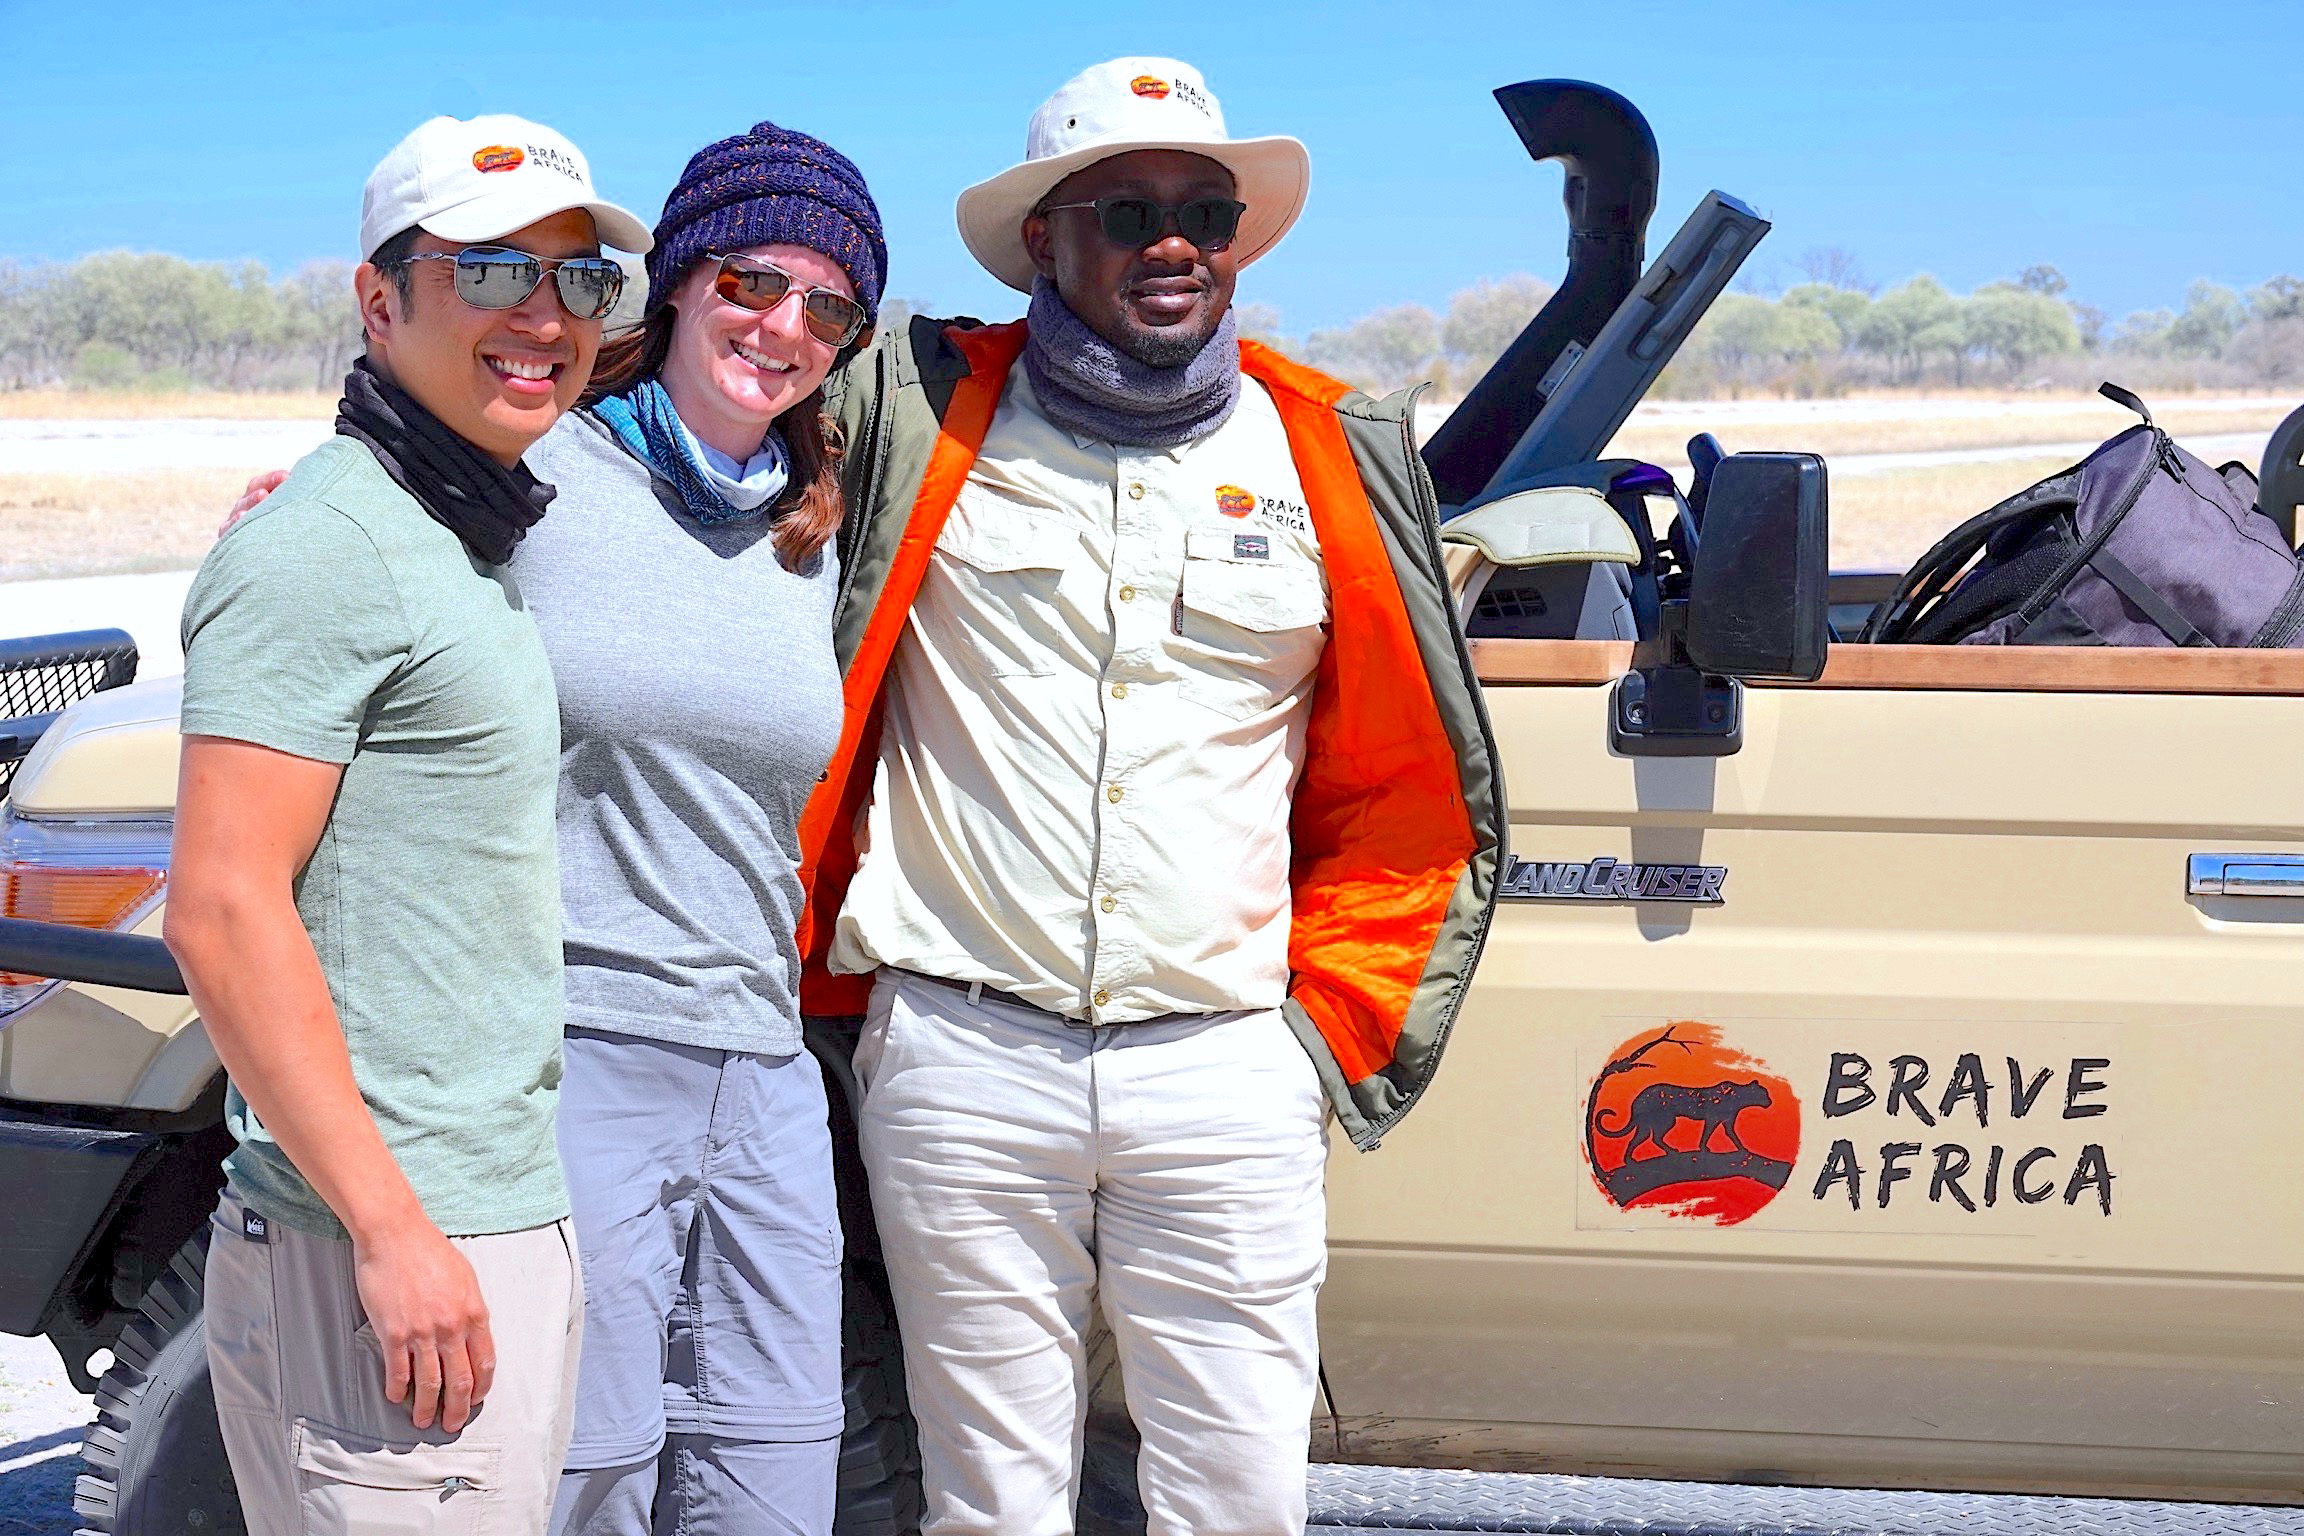 Brave Africa's 3 Owners: Patrick, Kelly, and Wina